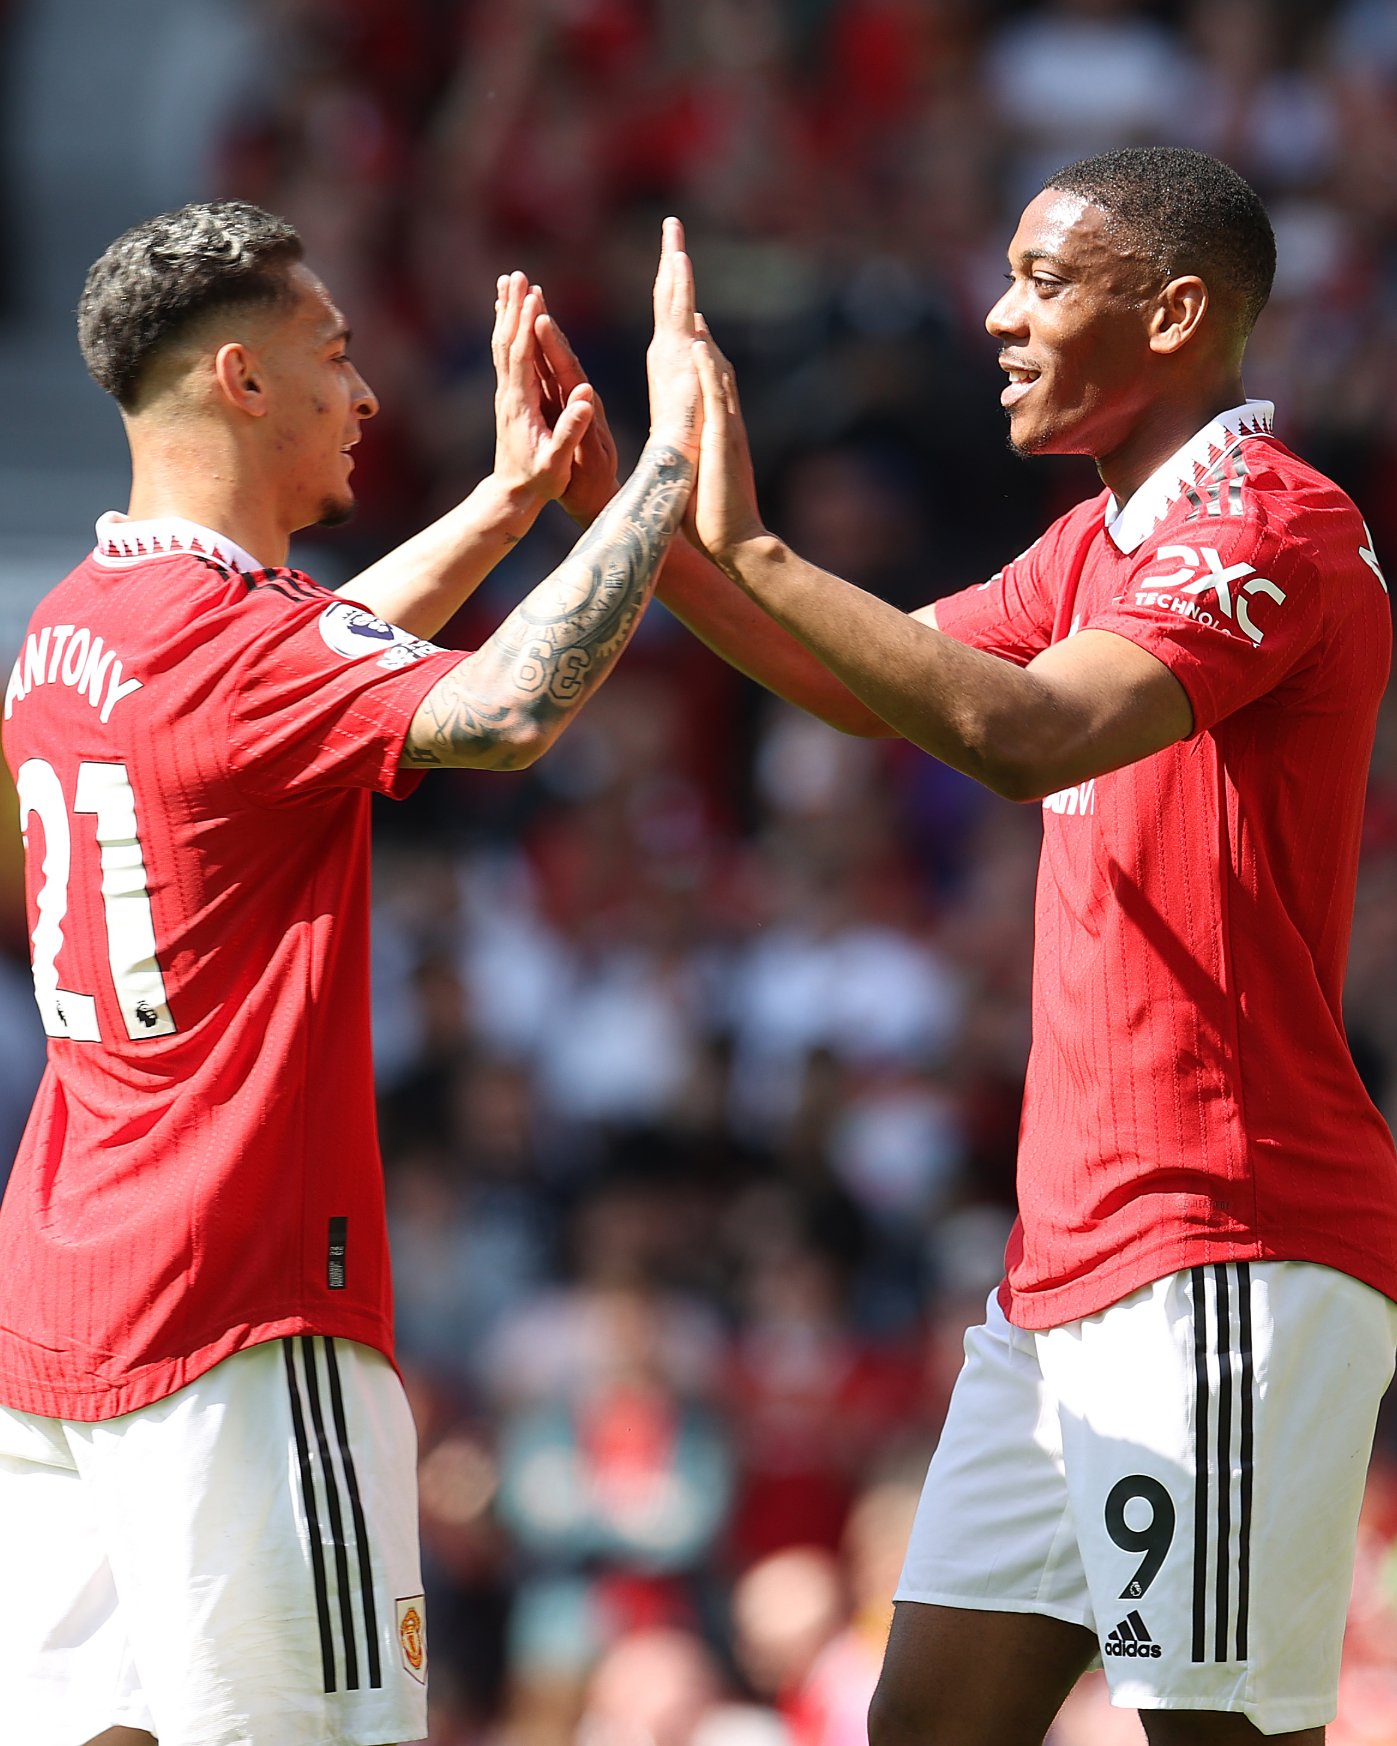 Manchester United 2 - 0 Wolves